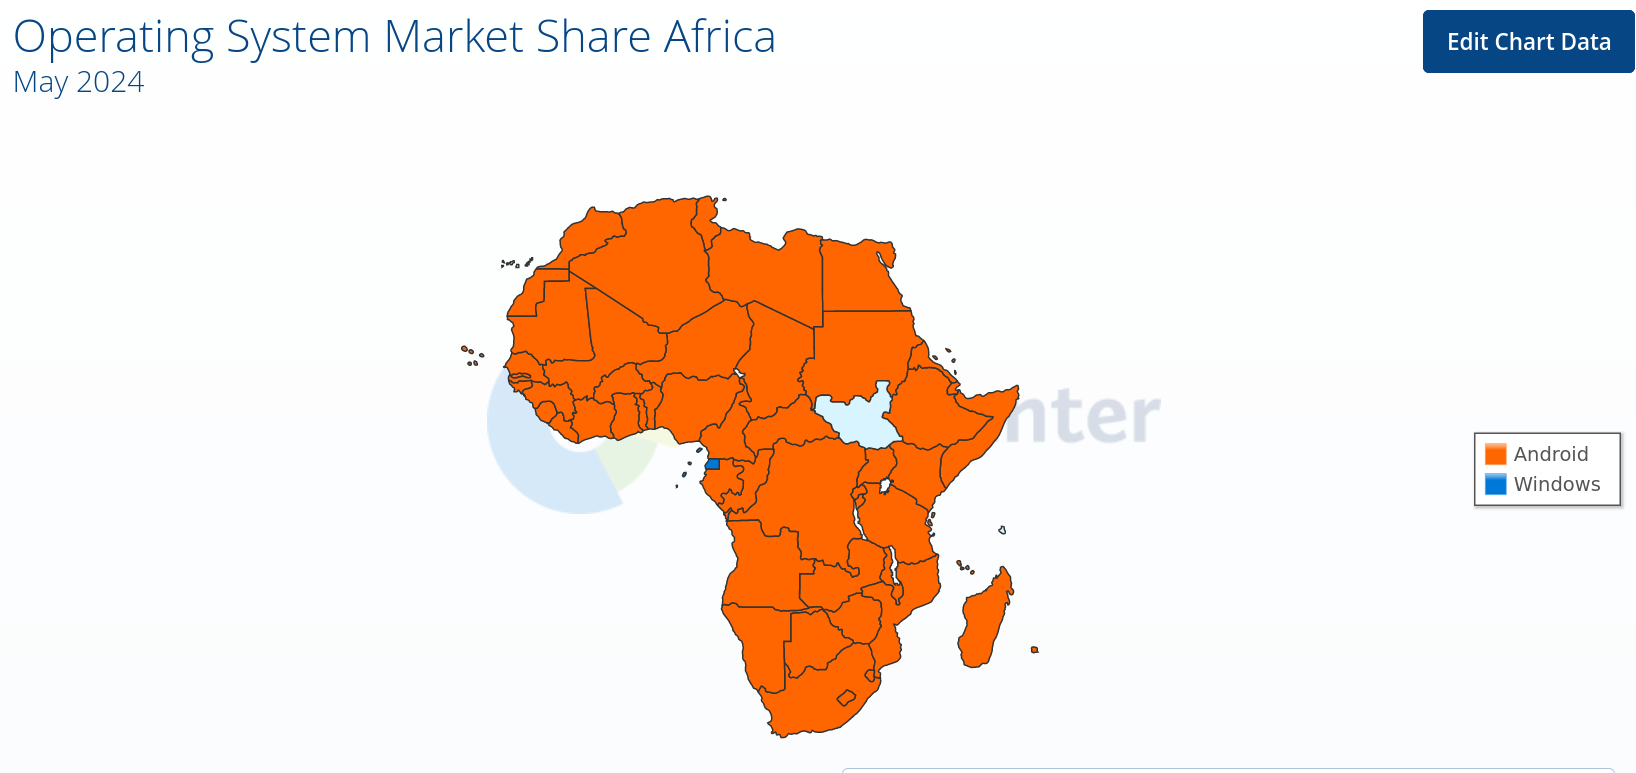 Operating System Market Share Africa in May 2024